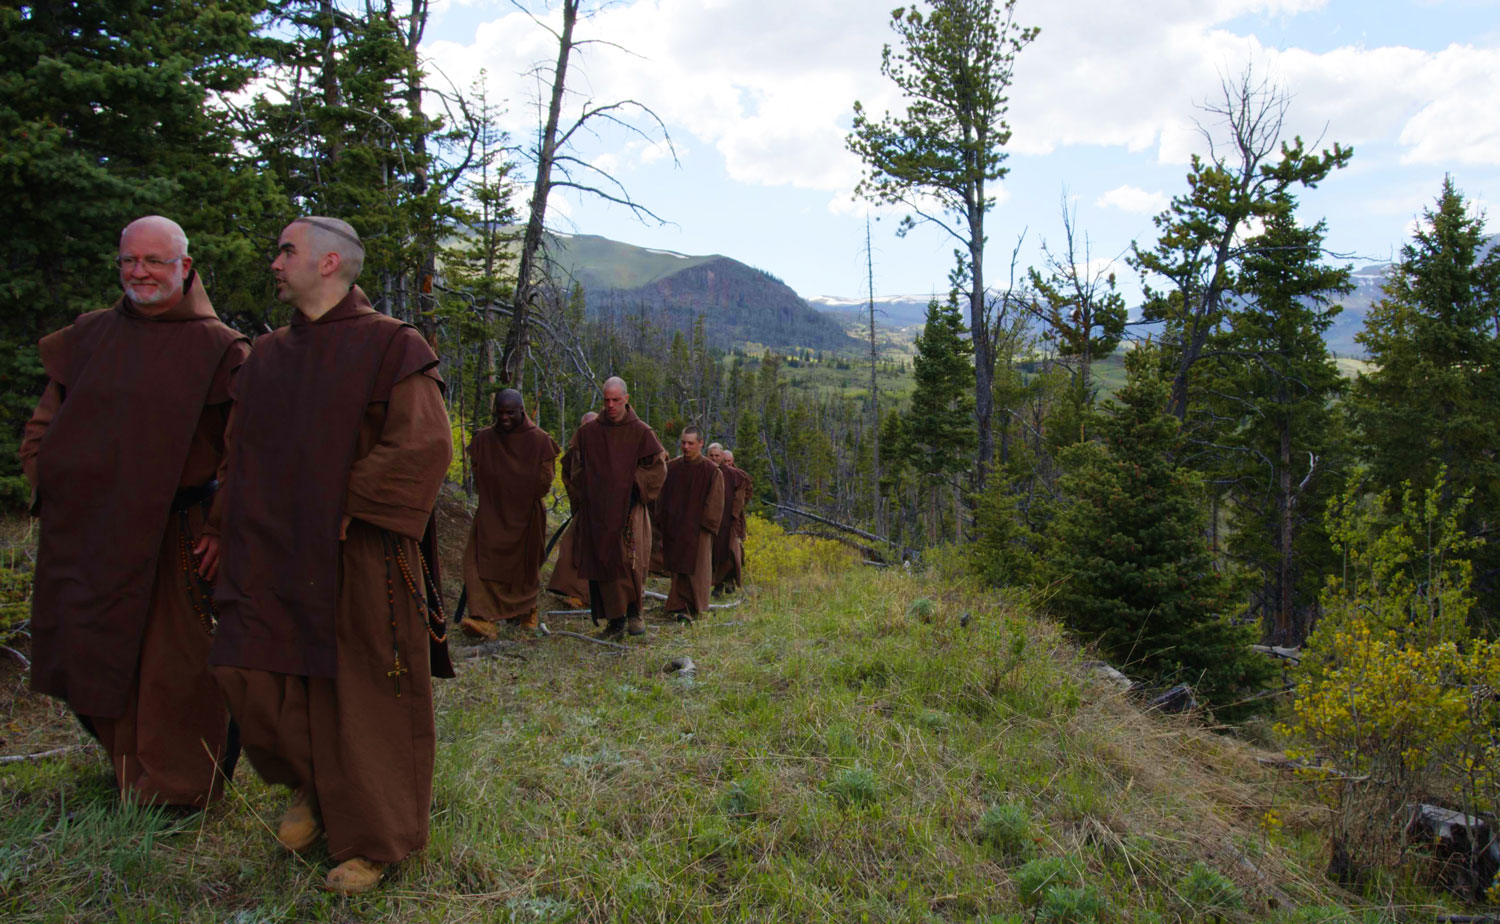 Monks on a recreation hike.